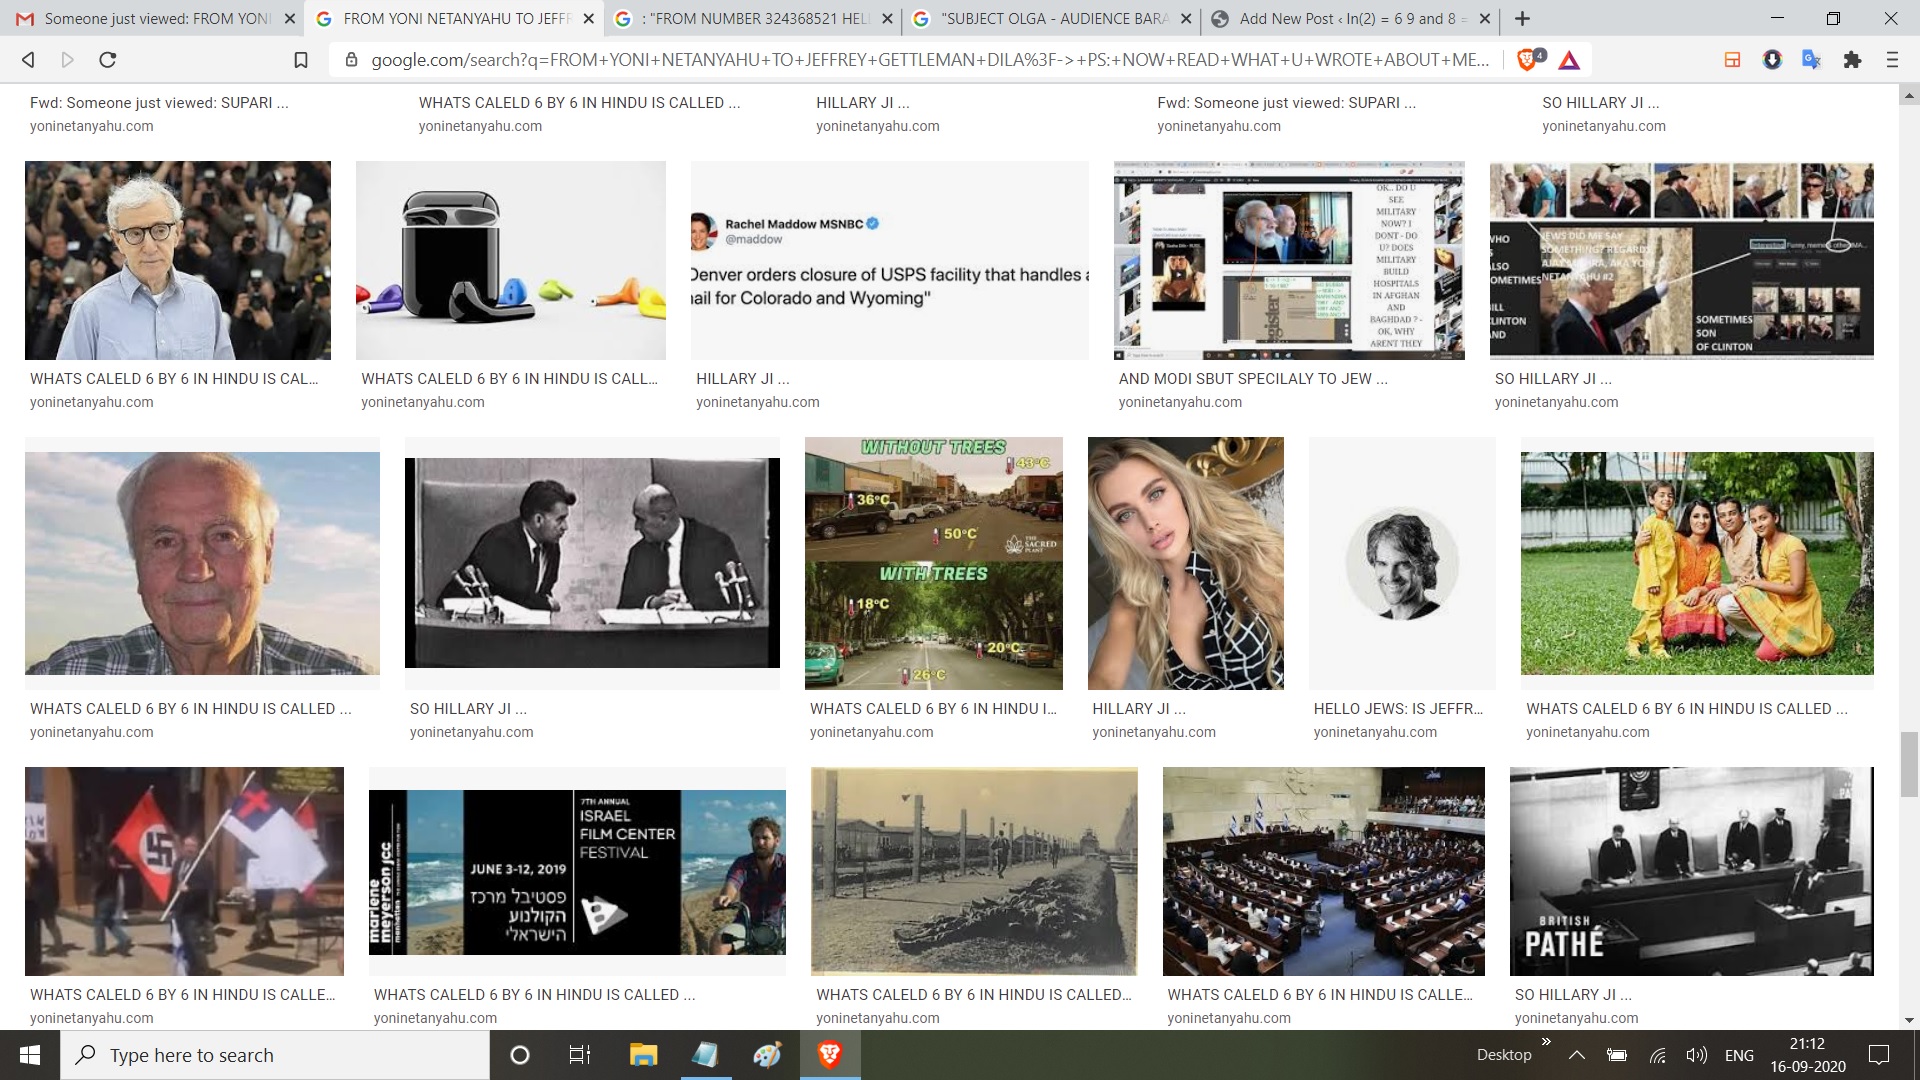 FROM YONI NETANYAHU TO JEFFREY GETTLEMAN KAK DILA  ? NOW READ WHAT U WROTE ABOUT ME- AND SEE THE MESSAGE IS IN THE URL OF THEIS IMAGE AND THAT IMAGE CHNAGES THE LOCATION WITH A WOR D CAED A COUNTTRY THAT STARTS WITH A U